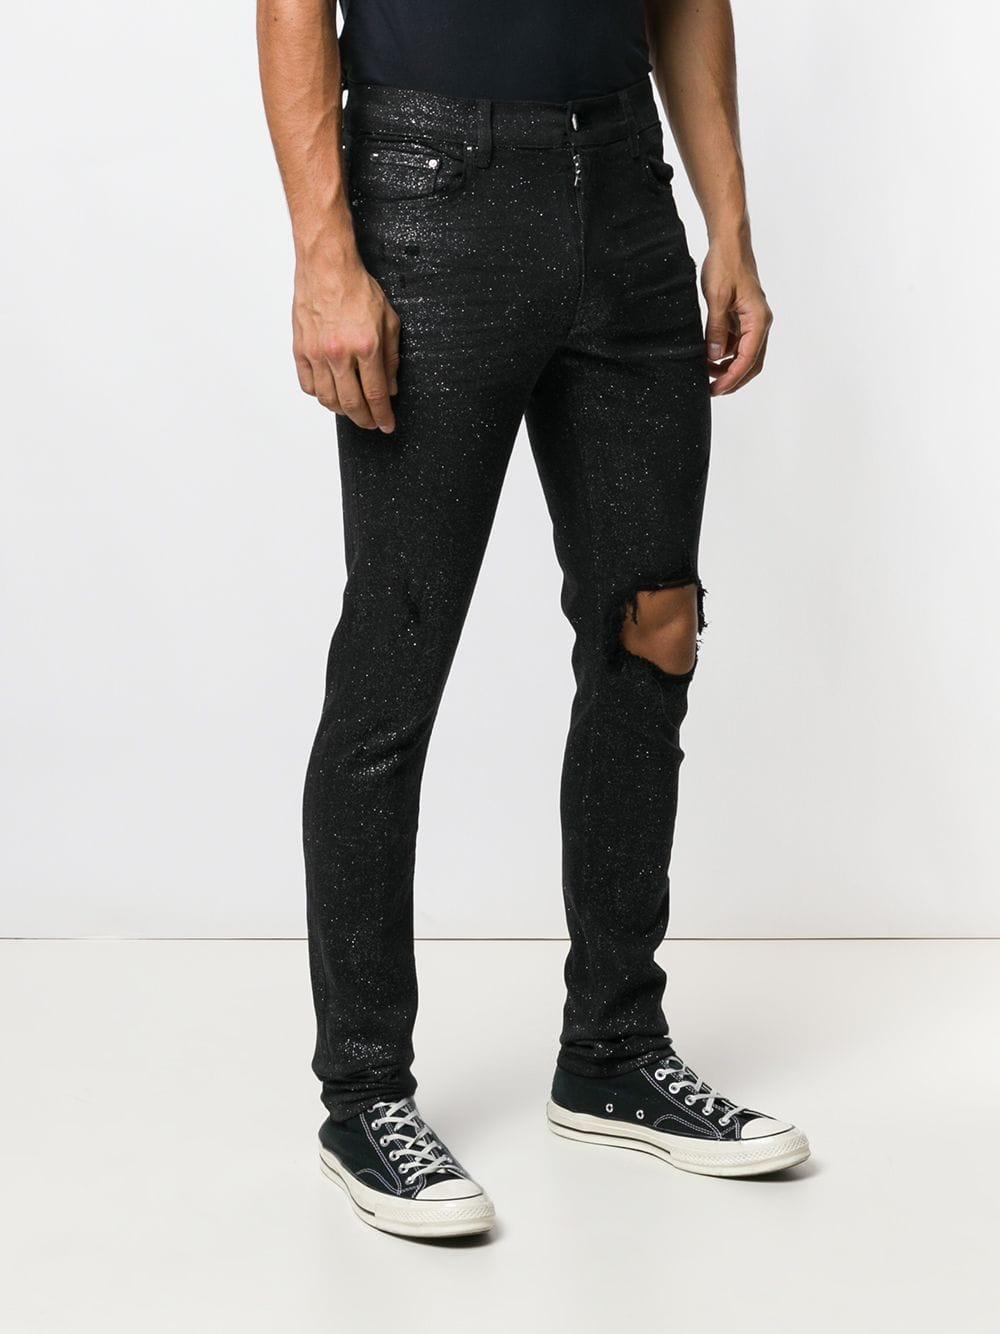 Mike Amiri Glitter Jeans | vlr.eng.br